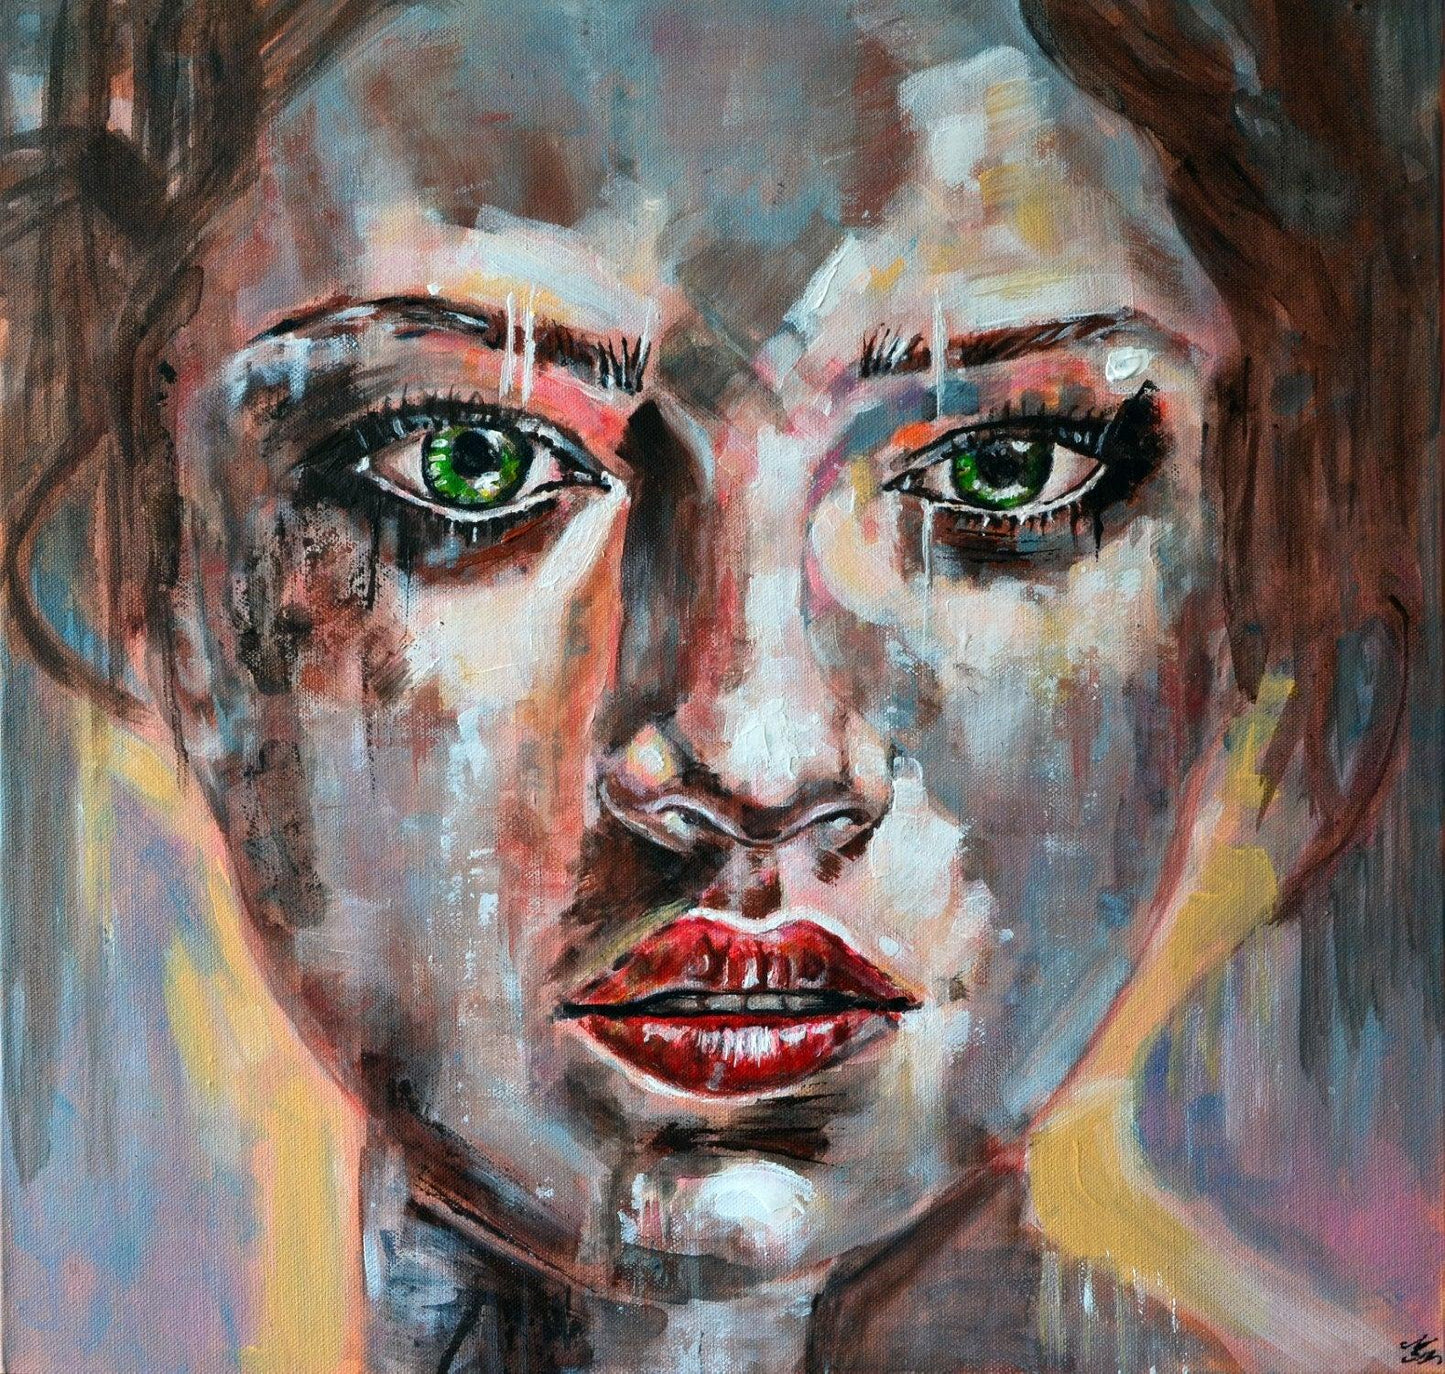 One-of-a-kind acrylic painting, 'Shining,' featuring a modern abstract woman portrait by Misty Lady.